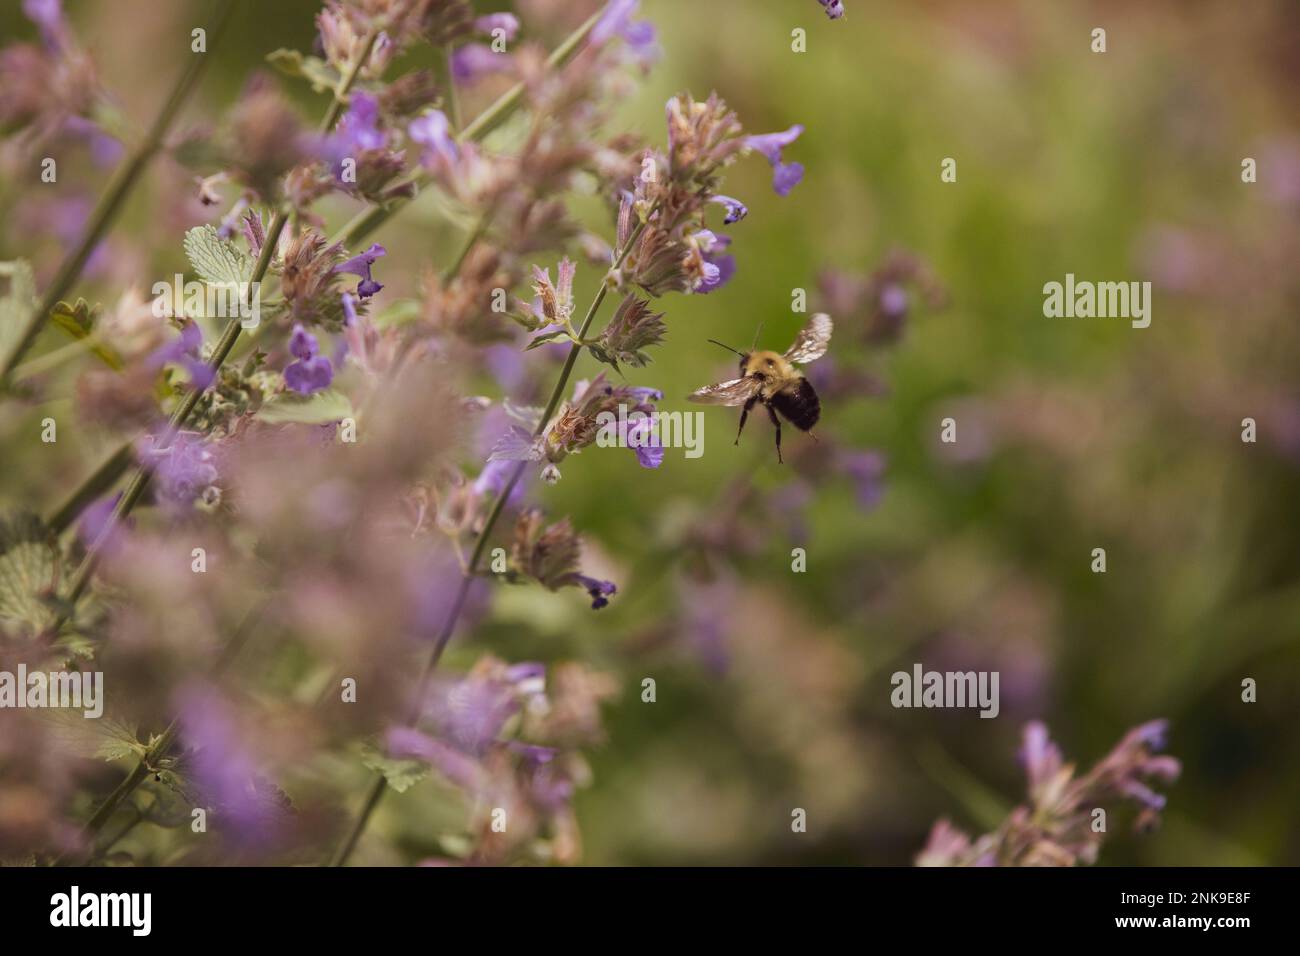 Bee flying near a catmint plant Stock Photo